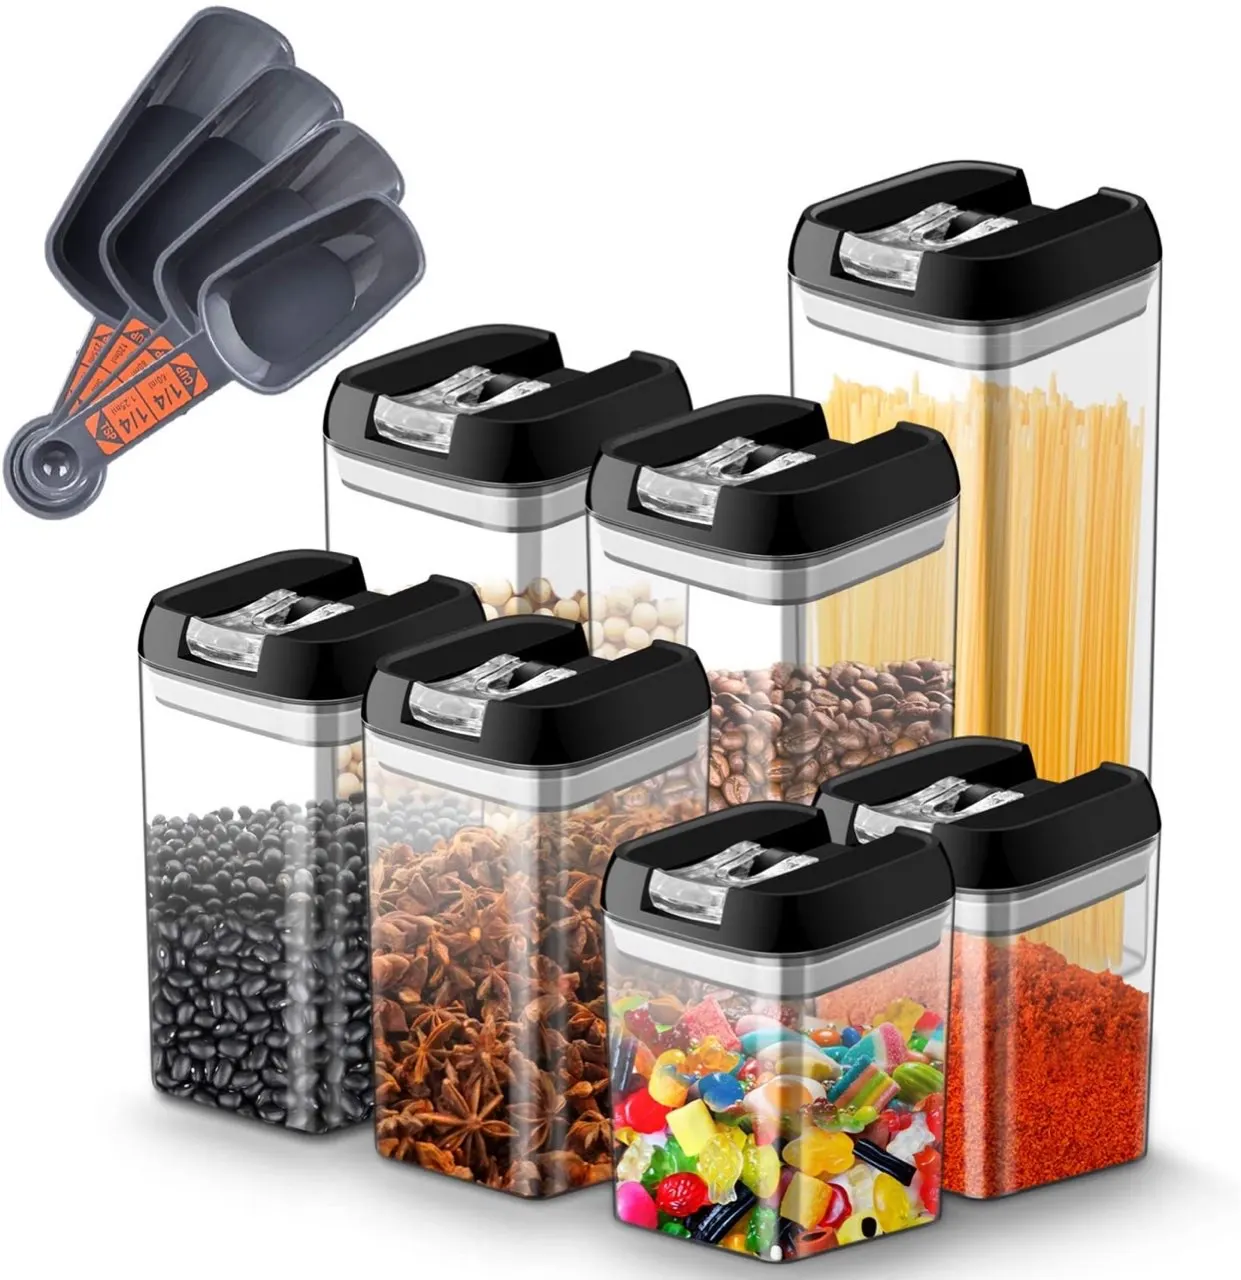 

home organization Easy Open 7 PCS BPA Free Reusable Cereal Snack Transparent Plastic dry food jars box set seal Airtight Storage Container food storage container